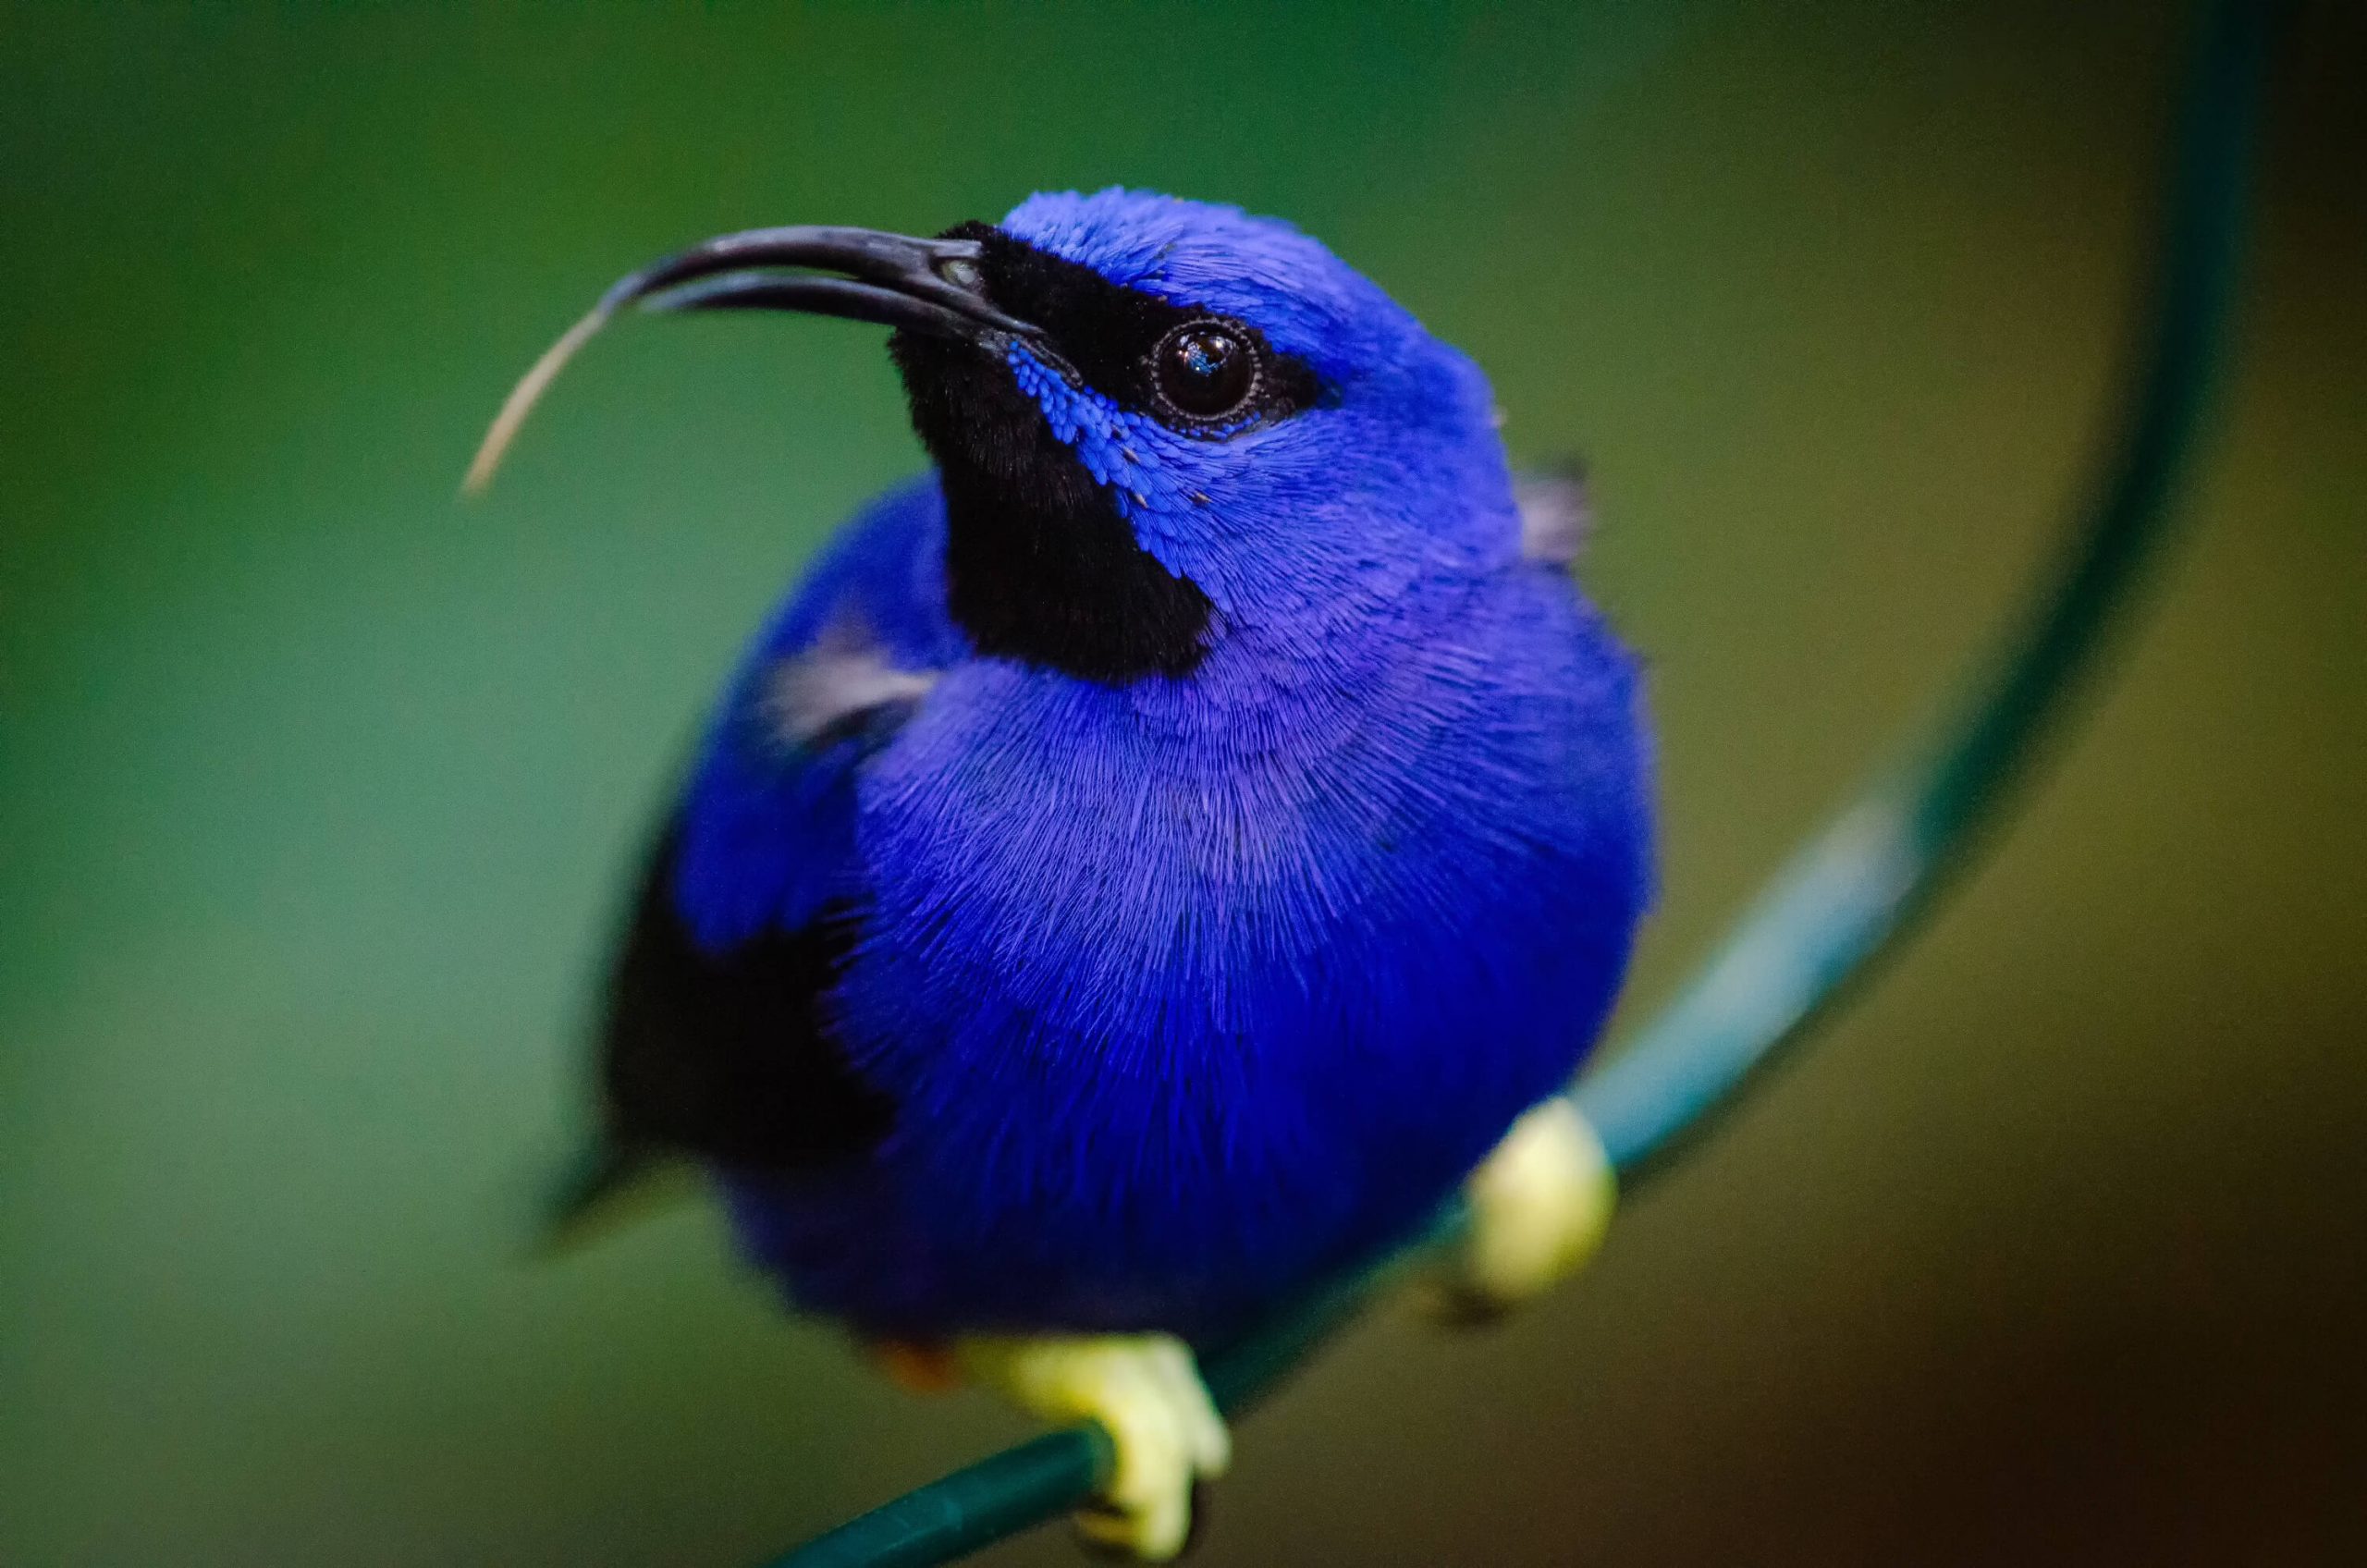  Celebrate July 4th with these all-American birds